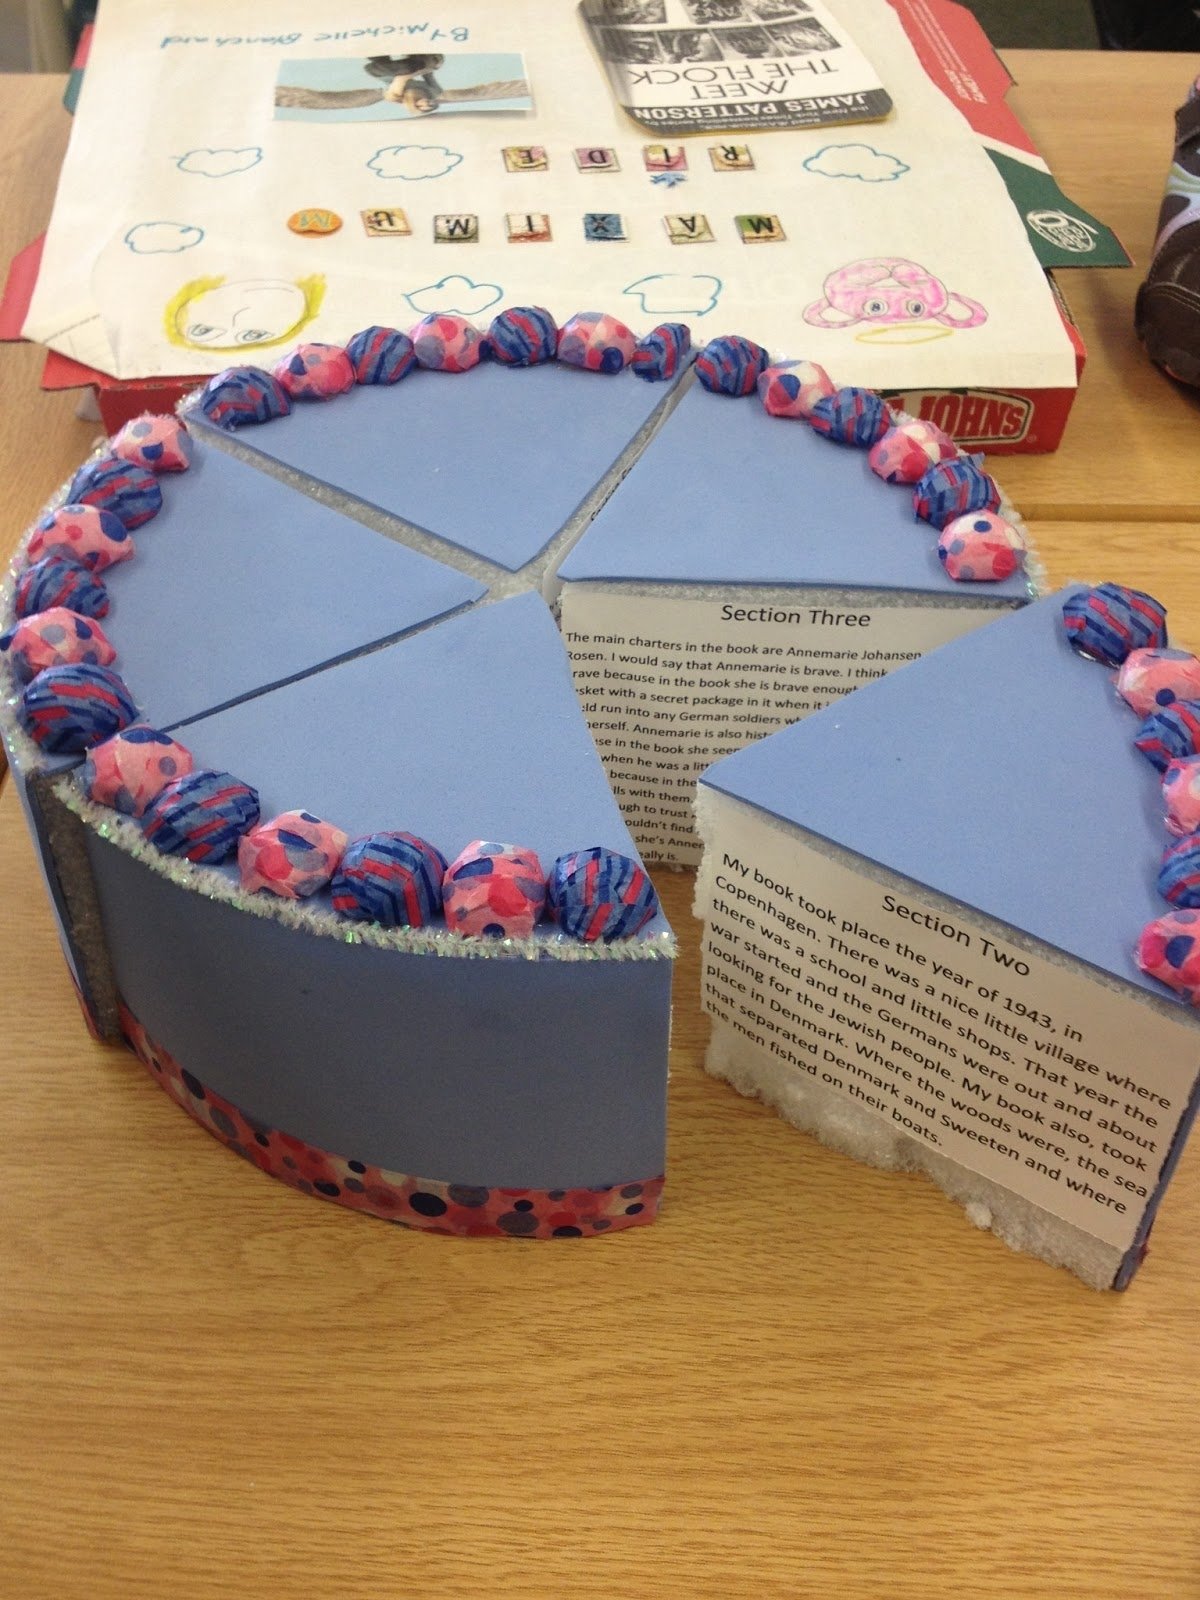 10 Attractive Creative Ideas For School Projects a tasty reading project mrs beatties classroom 3 2022